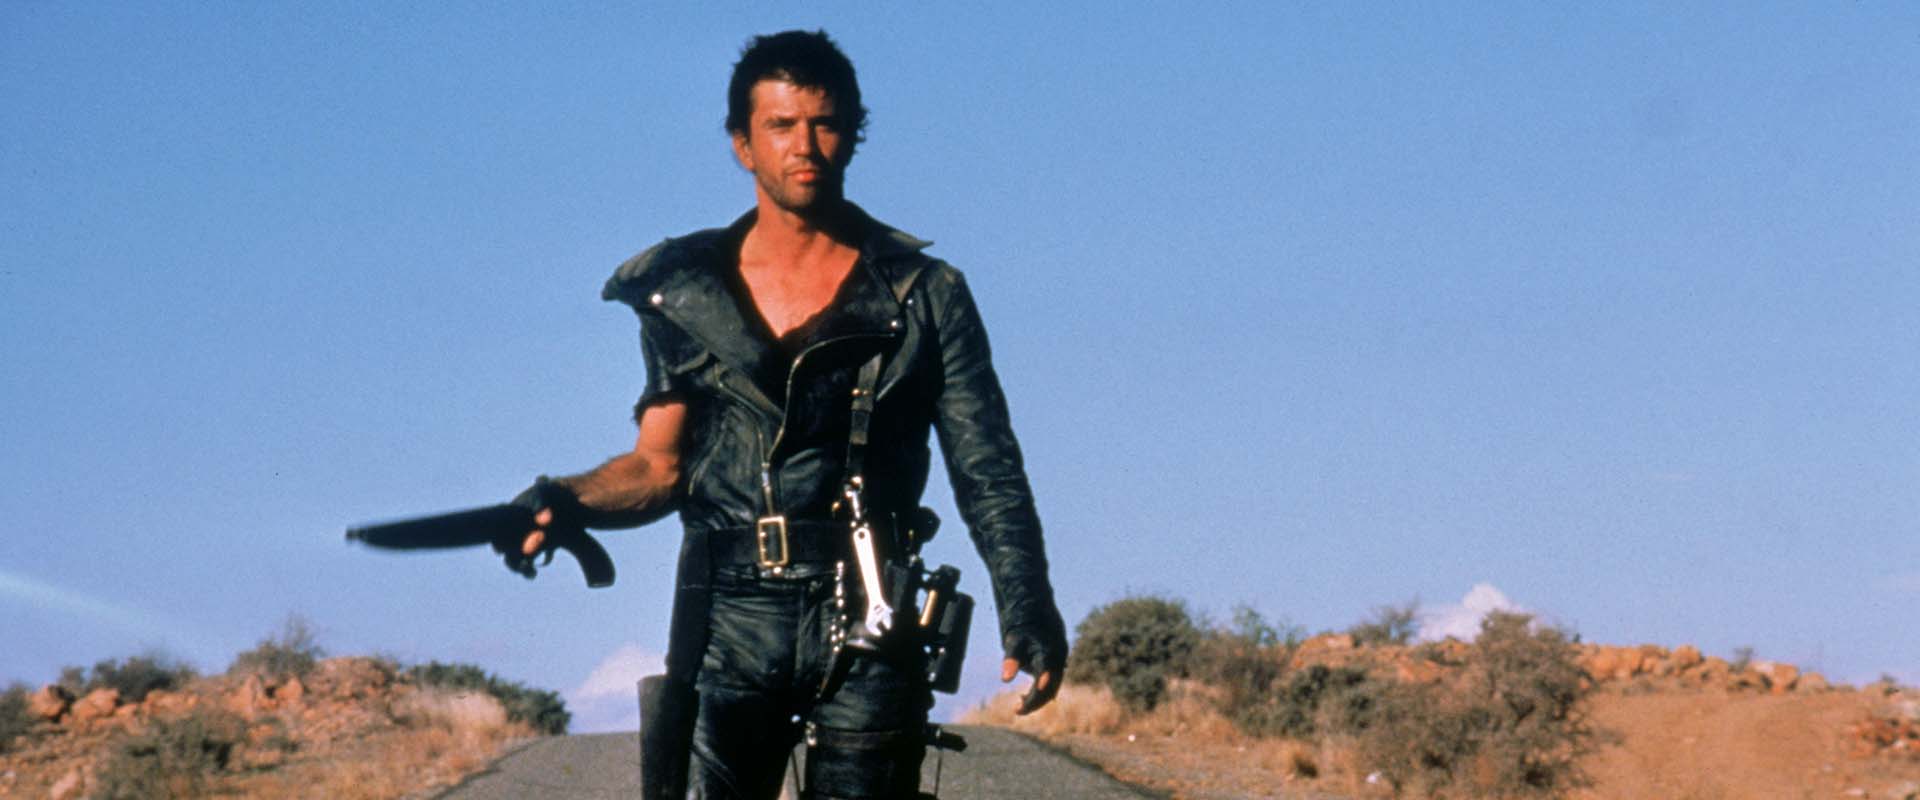 Mad Max, the road warrior, George Miller